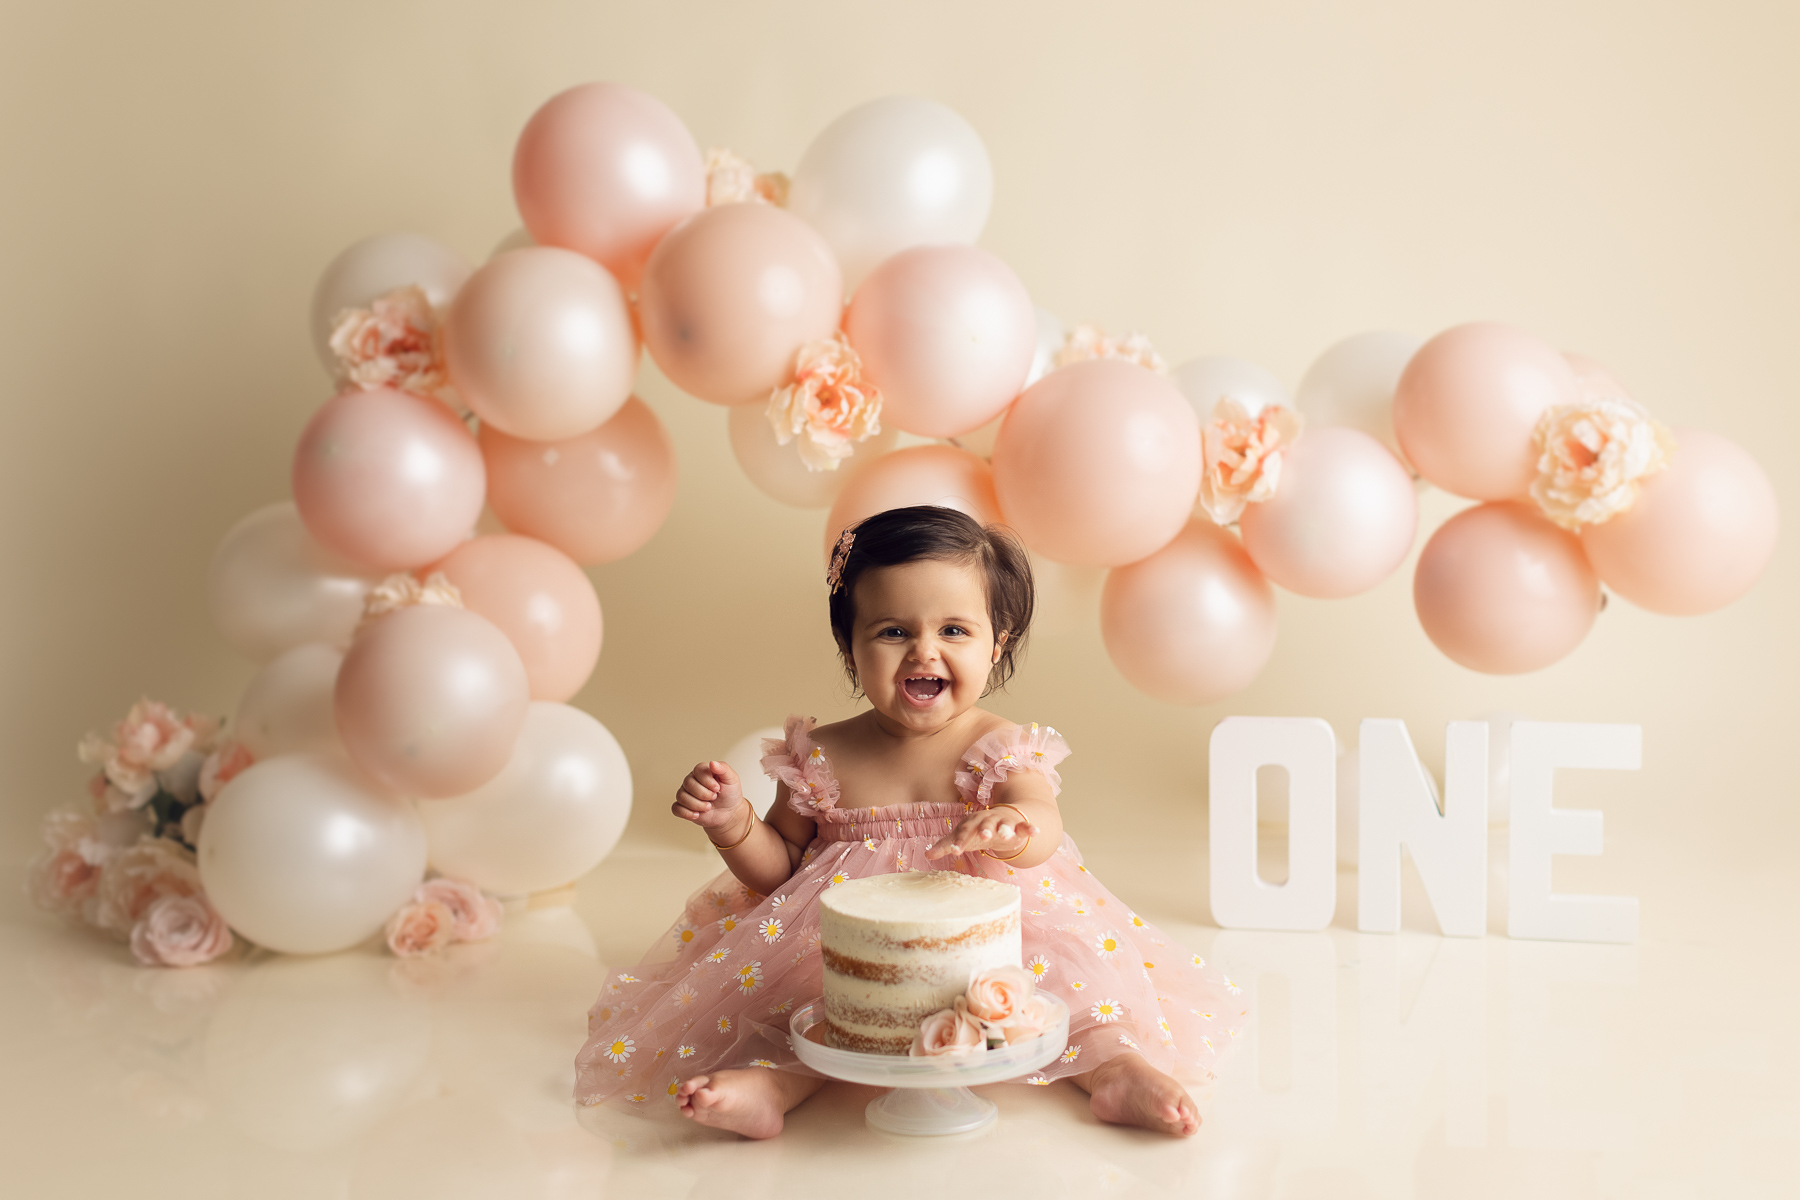 Cake smash photography Theme and preparation - Baby girl - white and pink- baby photography - best photographer Surrey